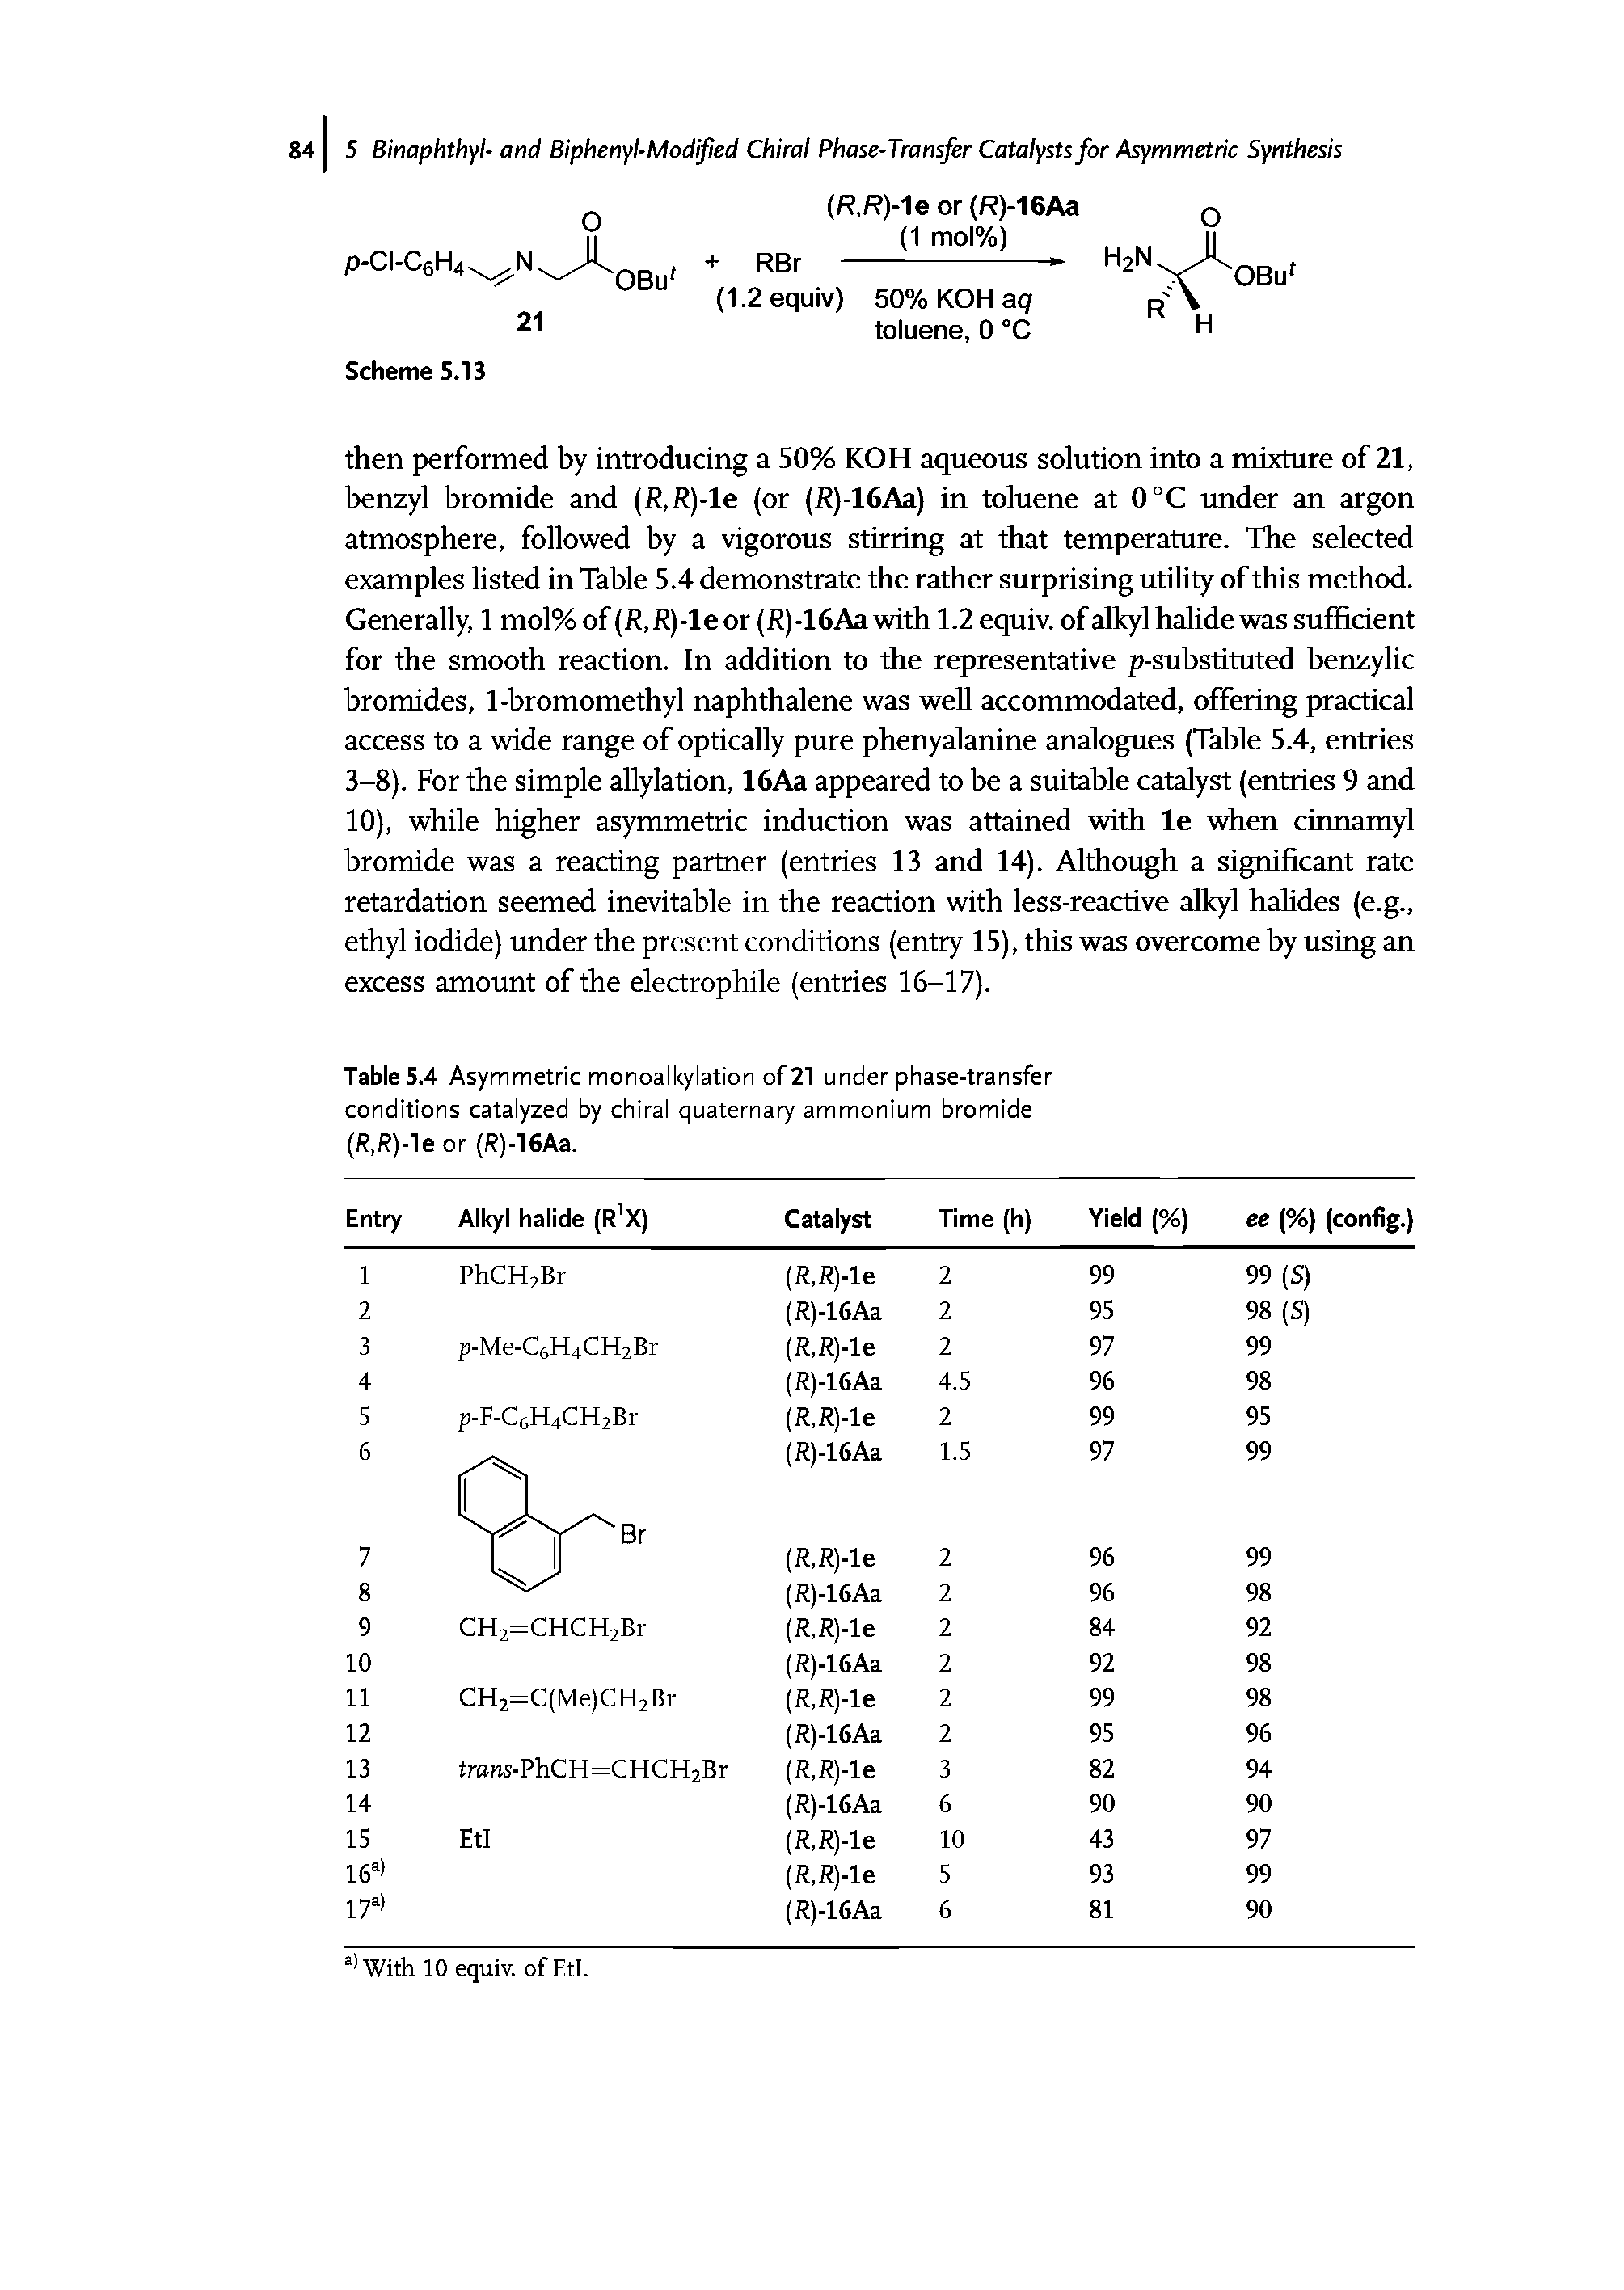 Table 5.4 Asymmetric monoalkylation of 21 under phase-transfer conditions catalyzed by chiral quaternary ammonium bromide (R,R)-le or (R)-16Aa.